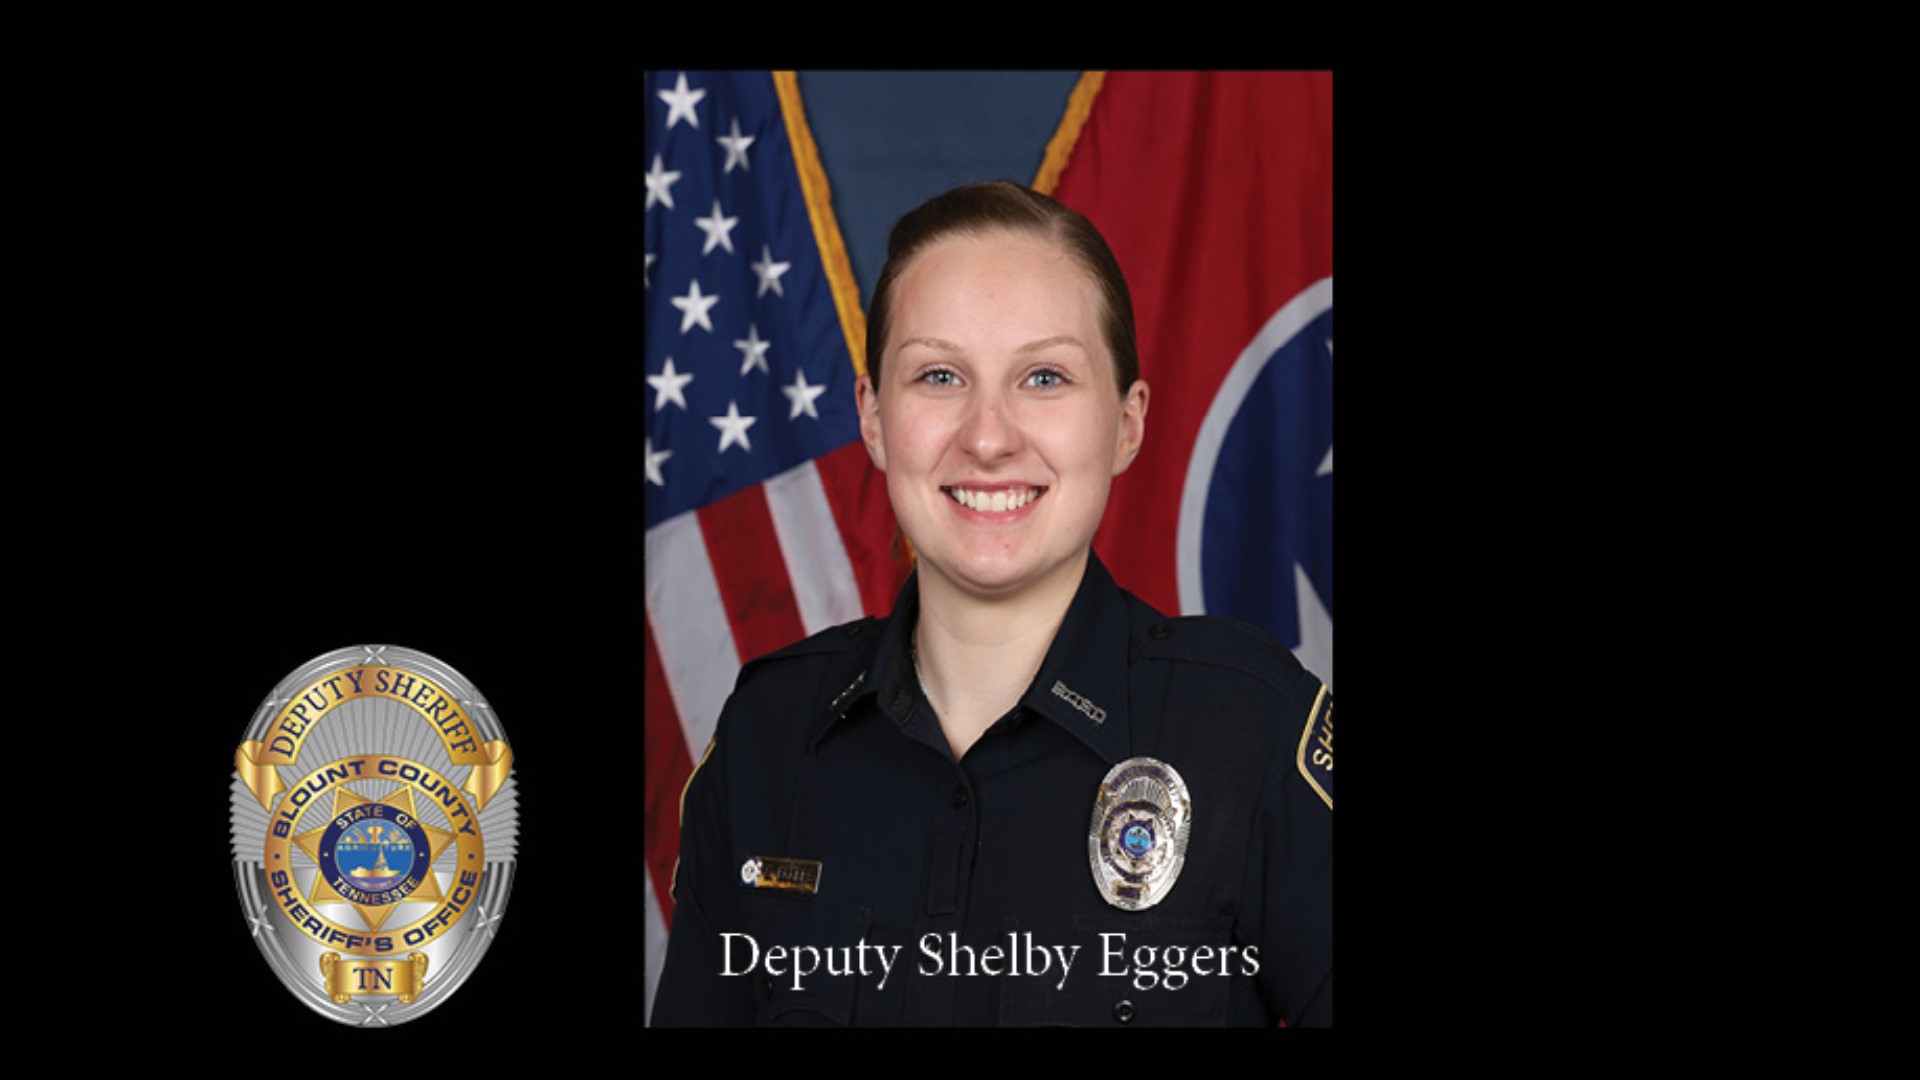 Deputy Eggars was selected to sing the National Anthem for her academy class graduation and subsequent academy graduations.